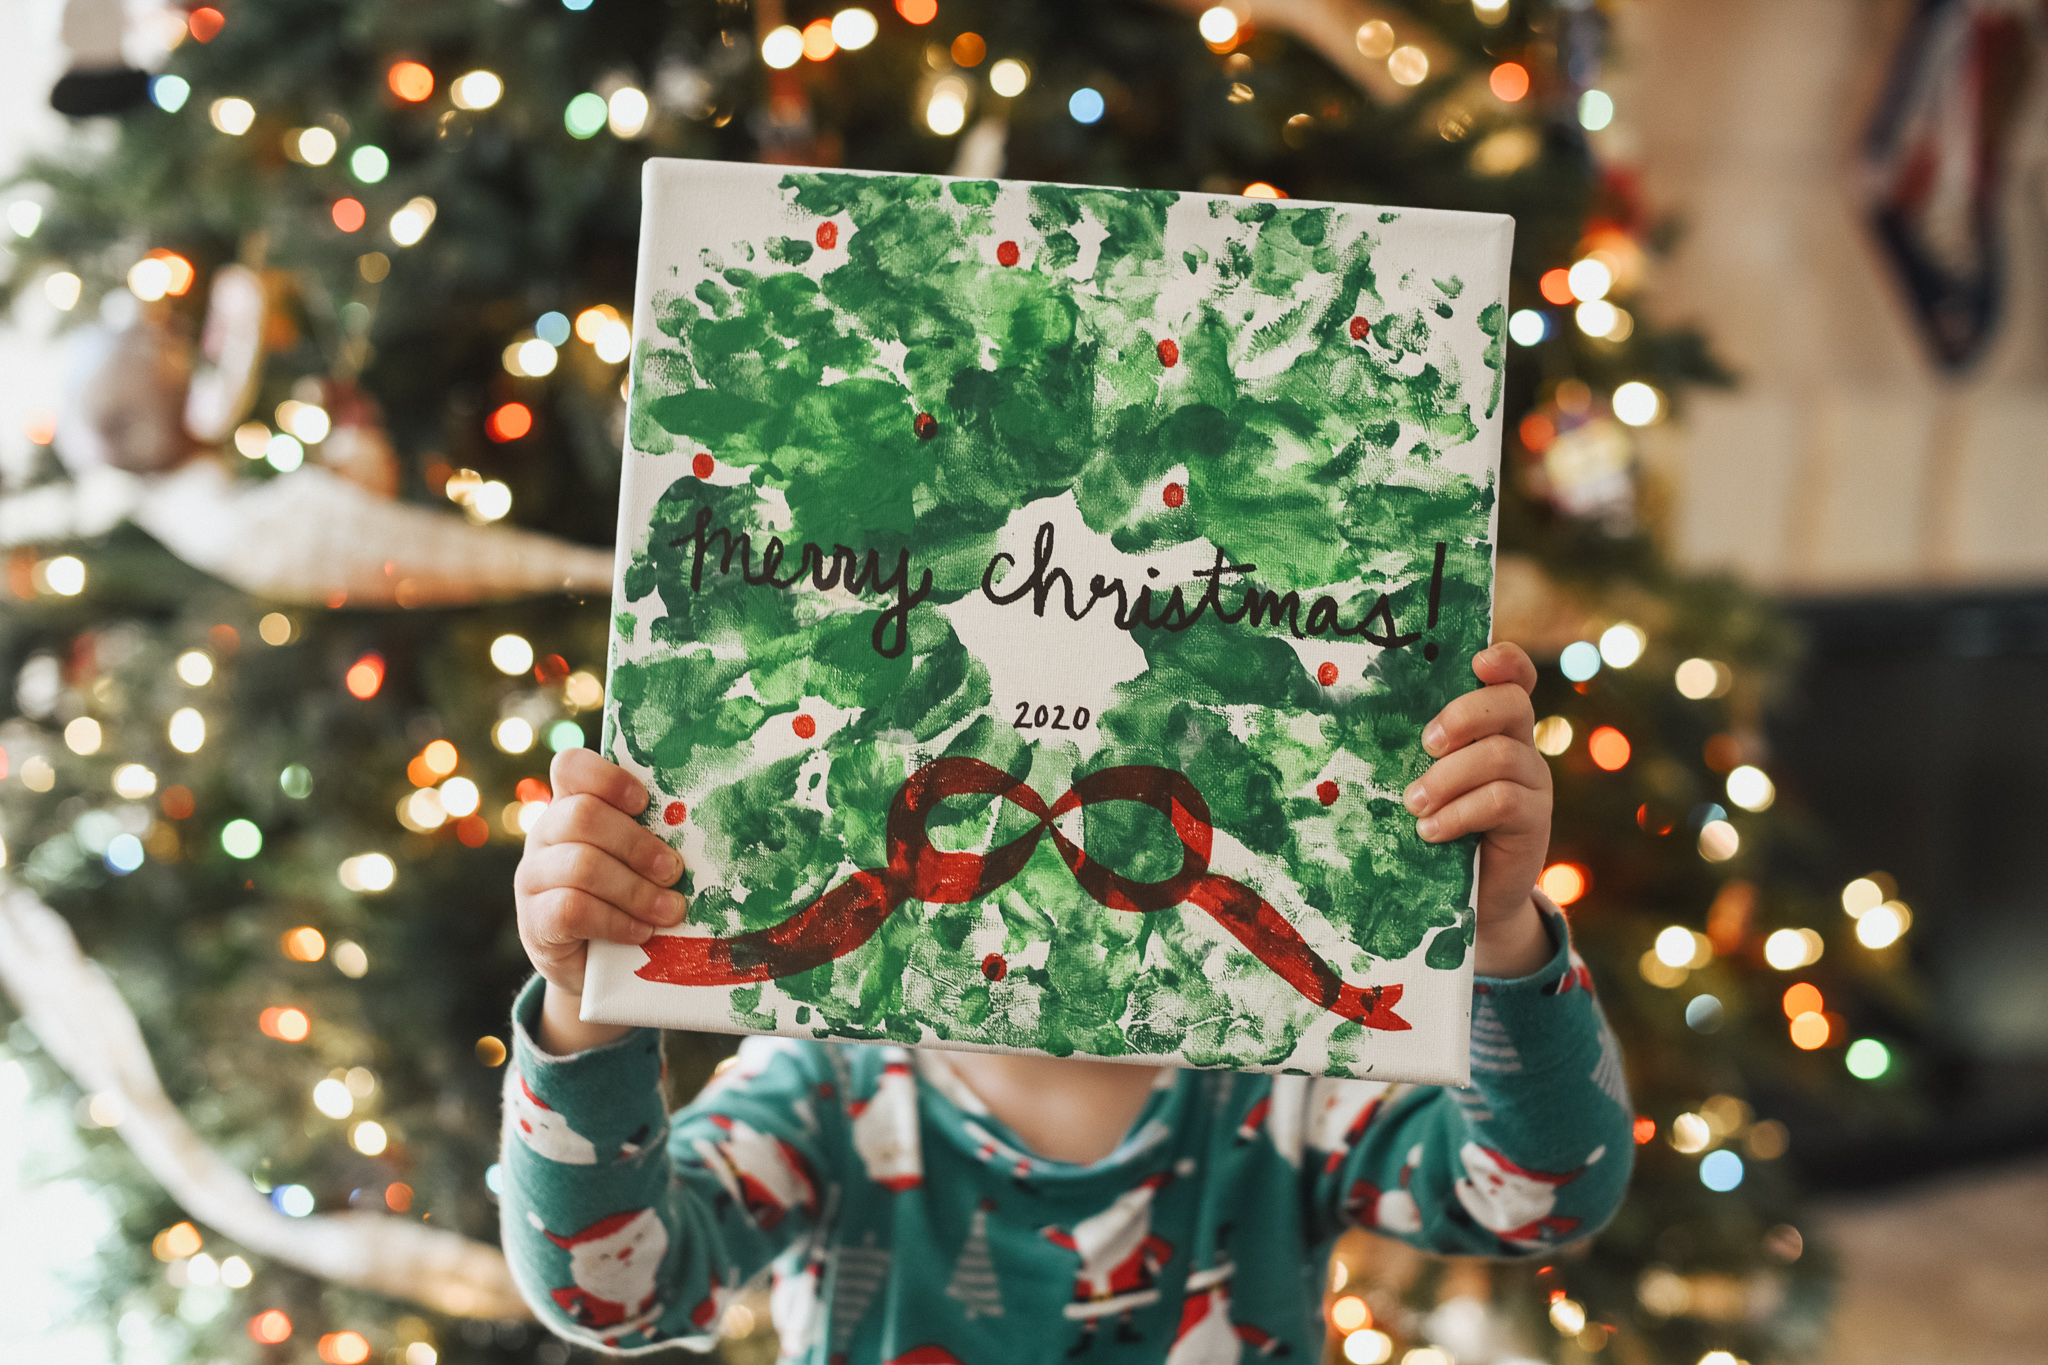 3 Easy Christmas Crafts for Toddlers